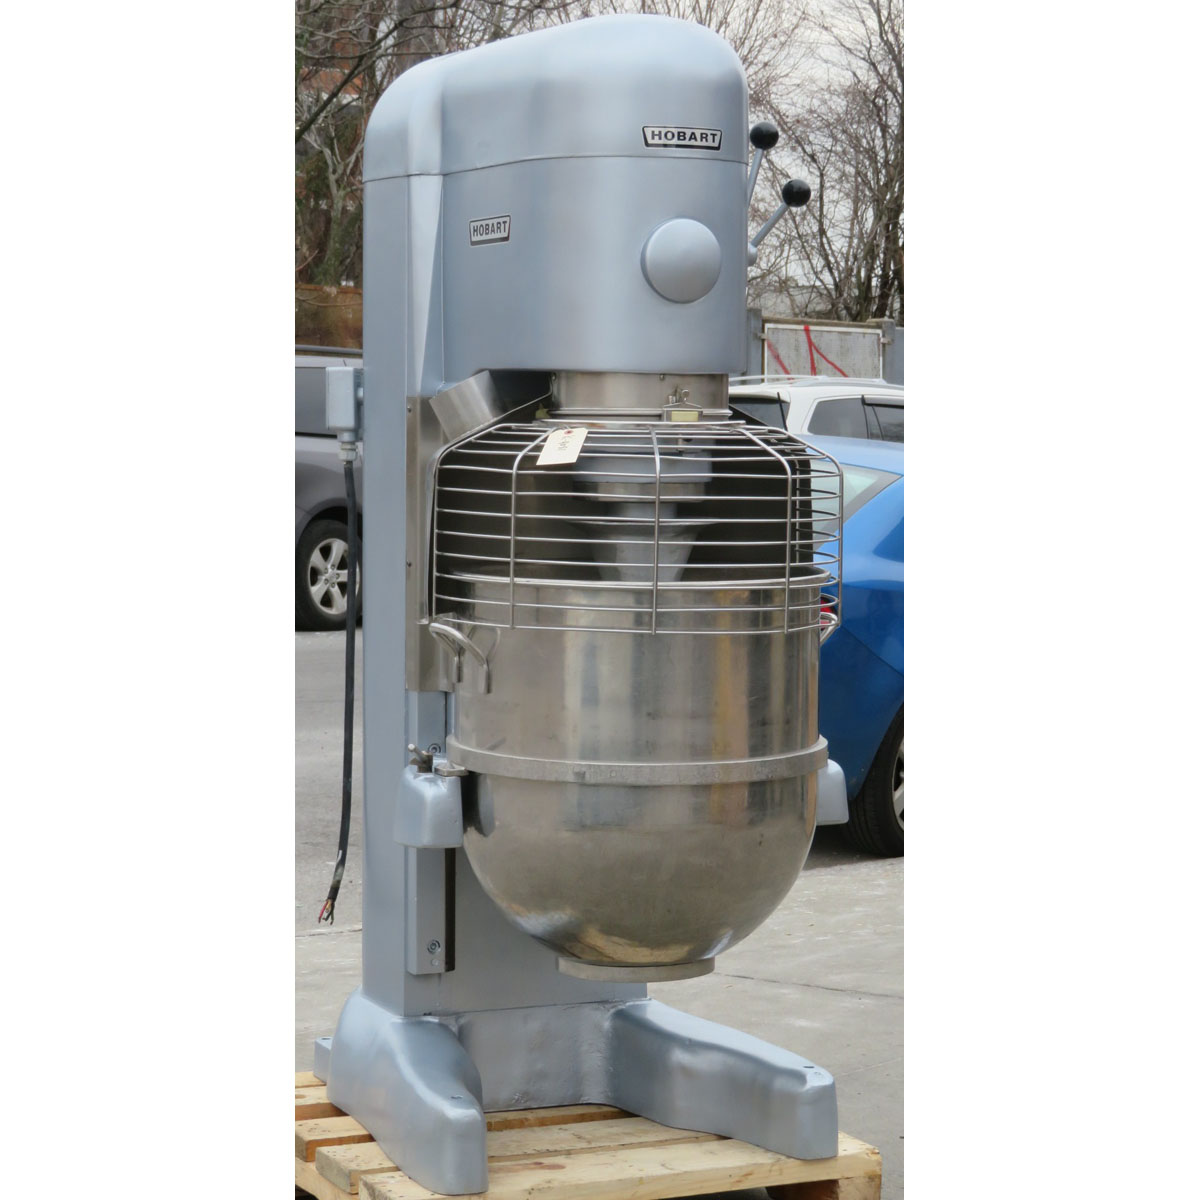 Hobart 140 Quart V1401 Mixer with Bowl and Chute on Splash Guard, Used Great Condition image 2